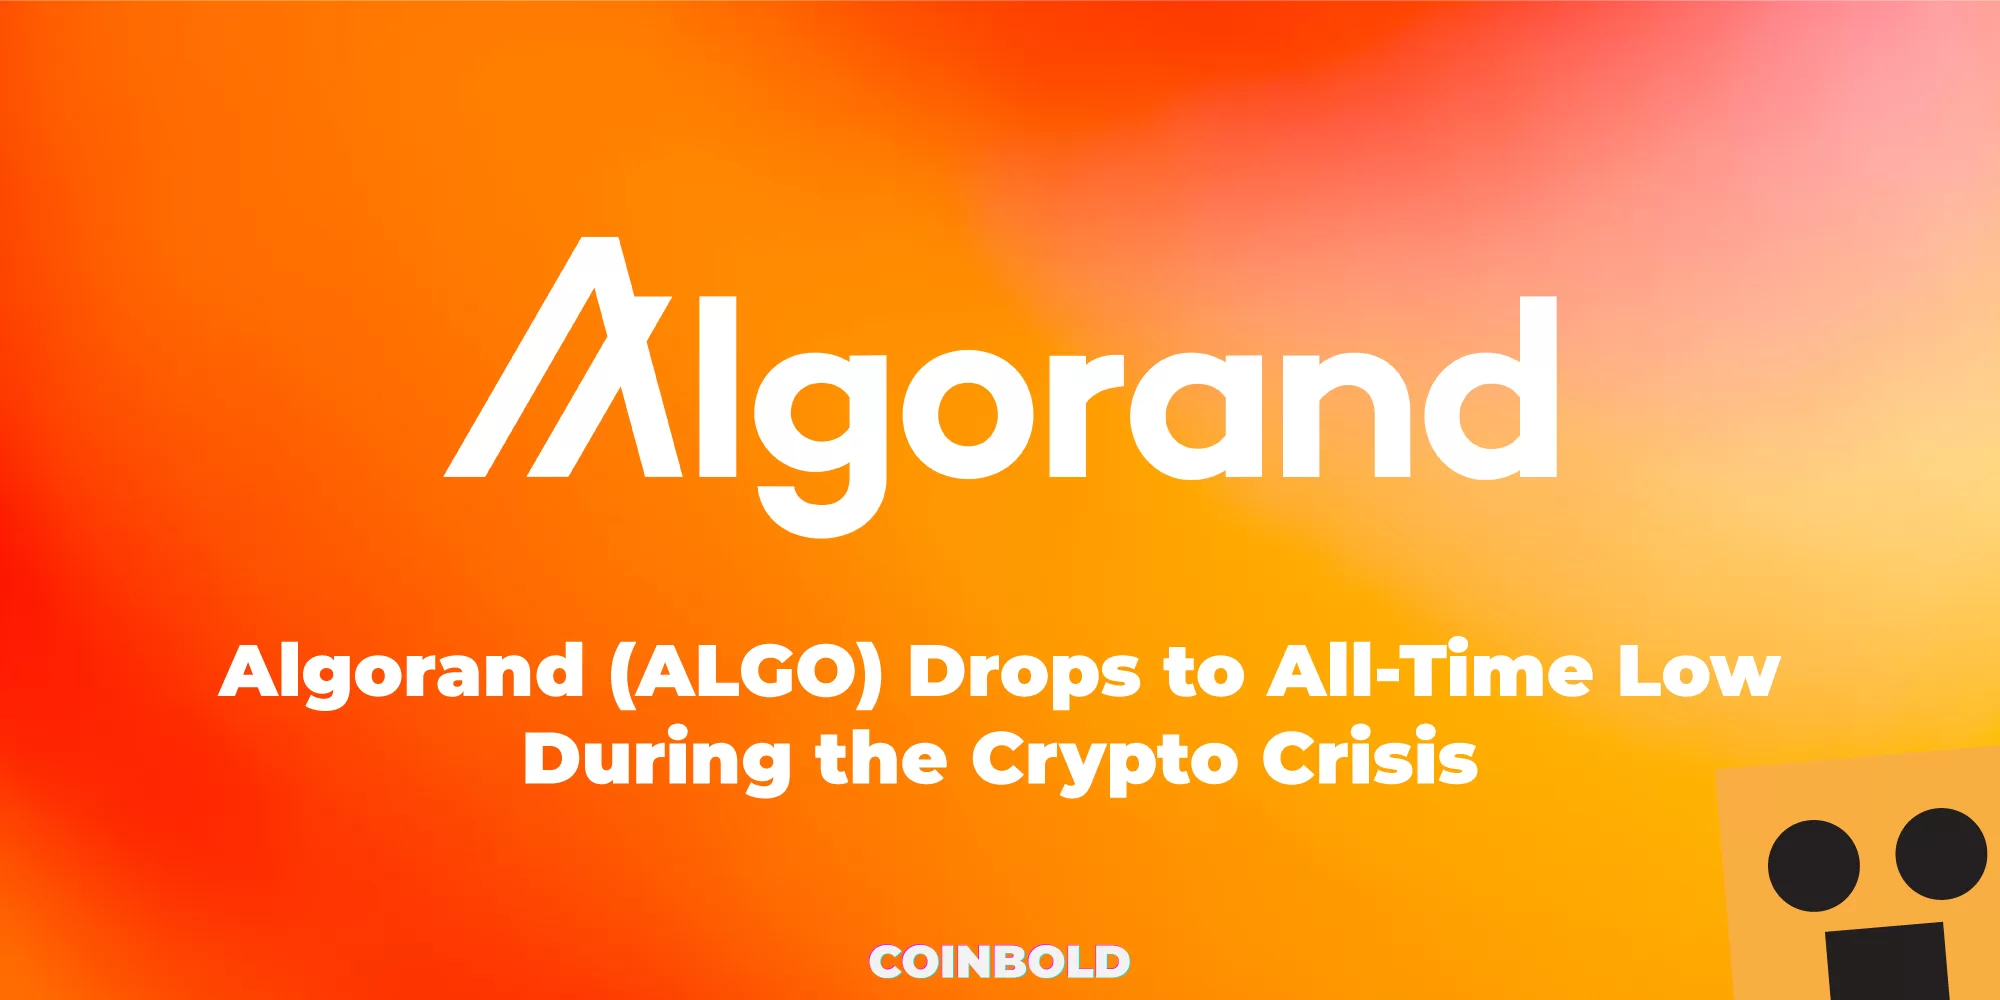 Algorand (ALGO) Drops to All Time Low, During the Crypto Crisis